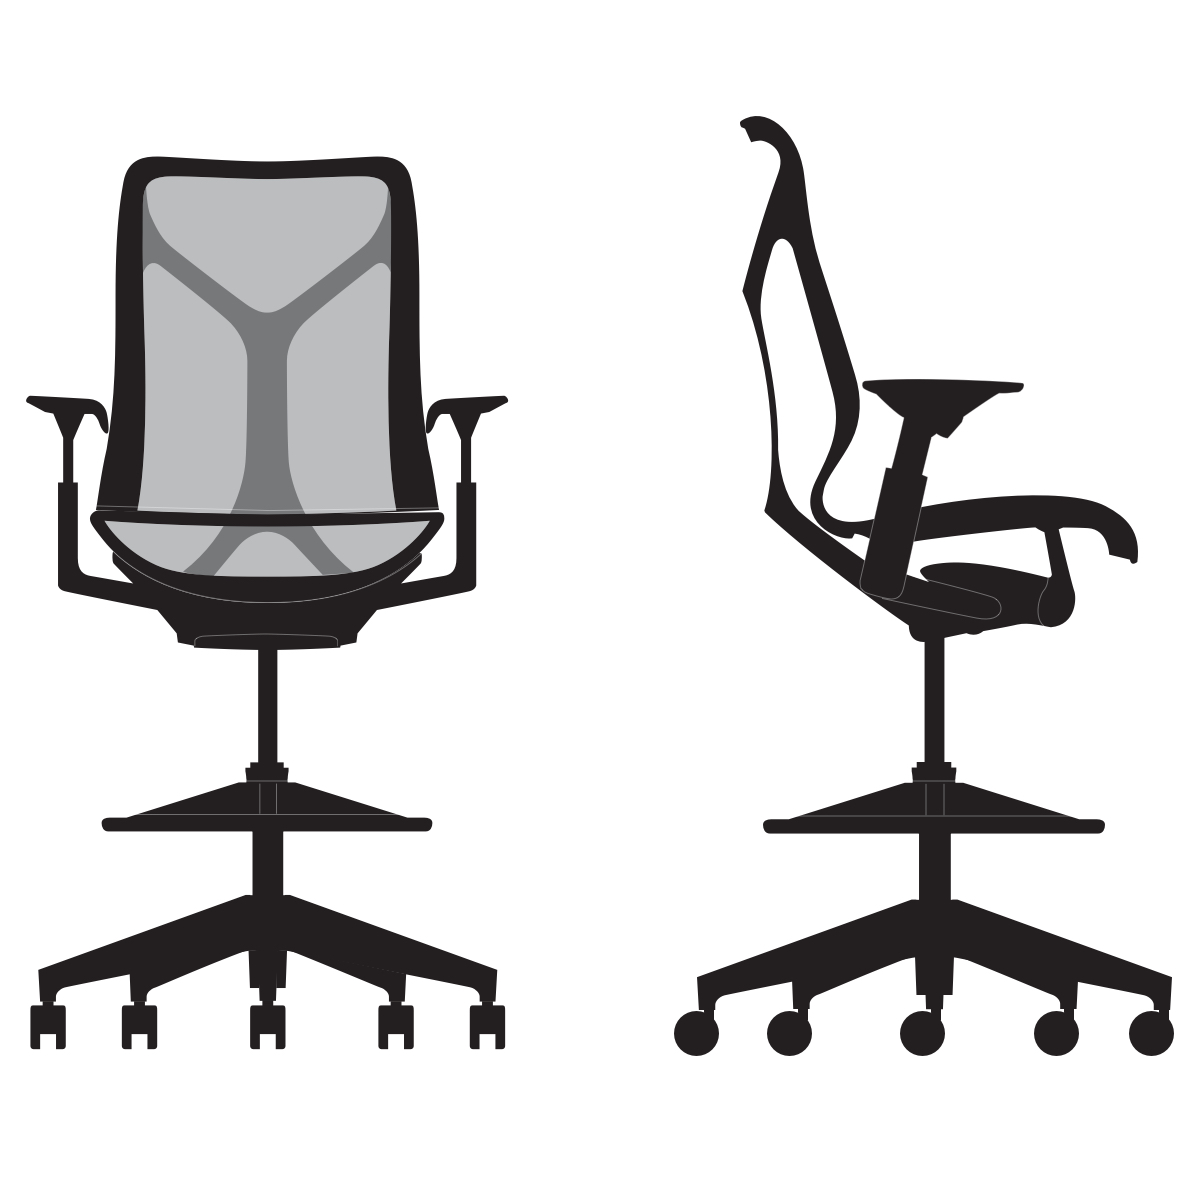 Line art of a Cosm mid-back stool, viewed from the front and the side.